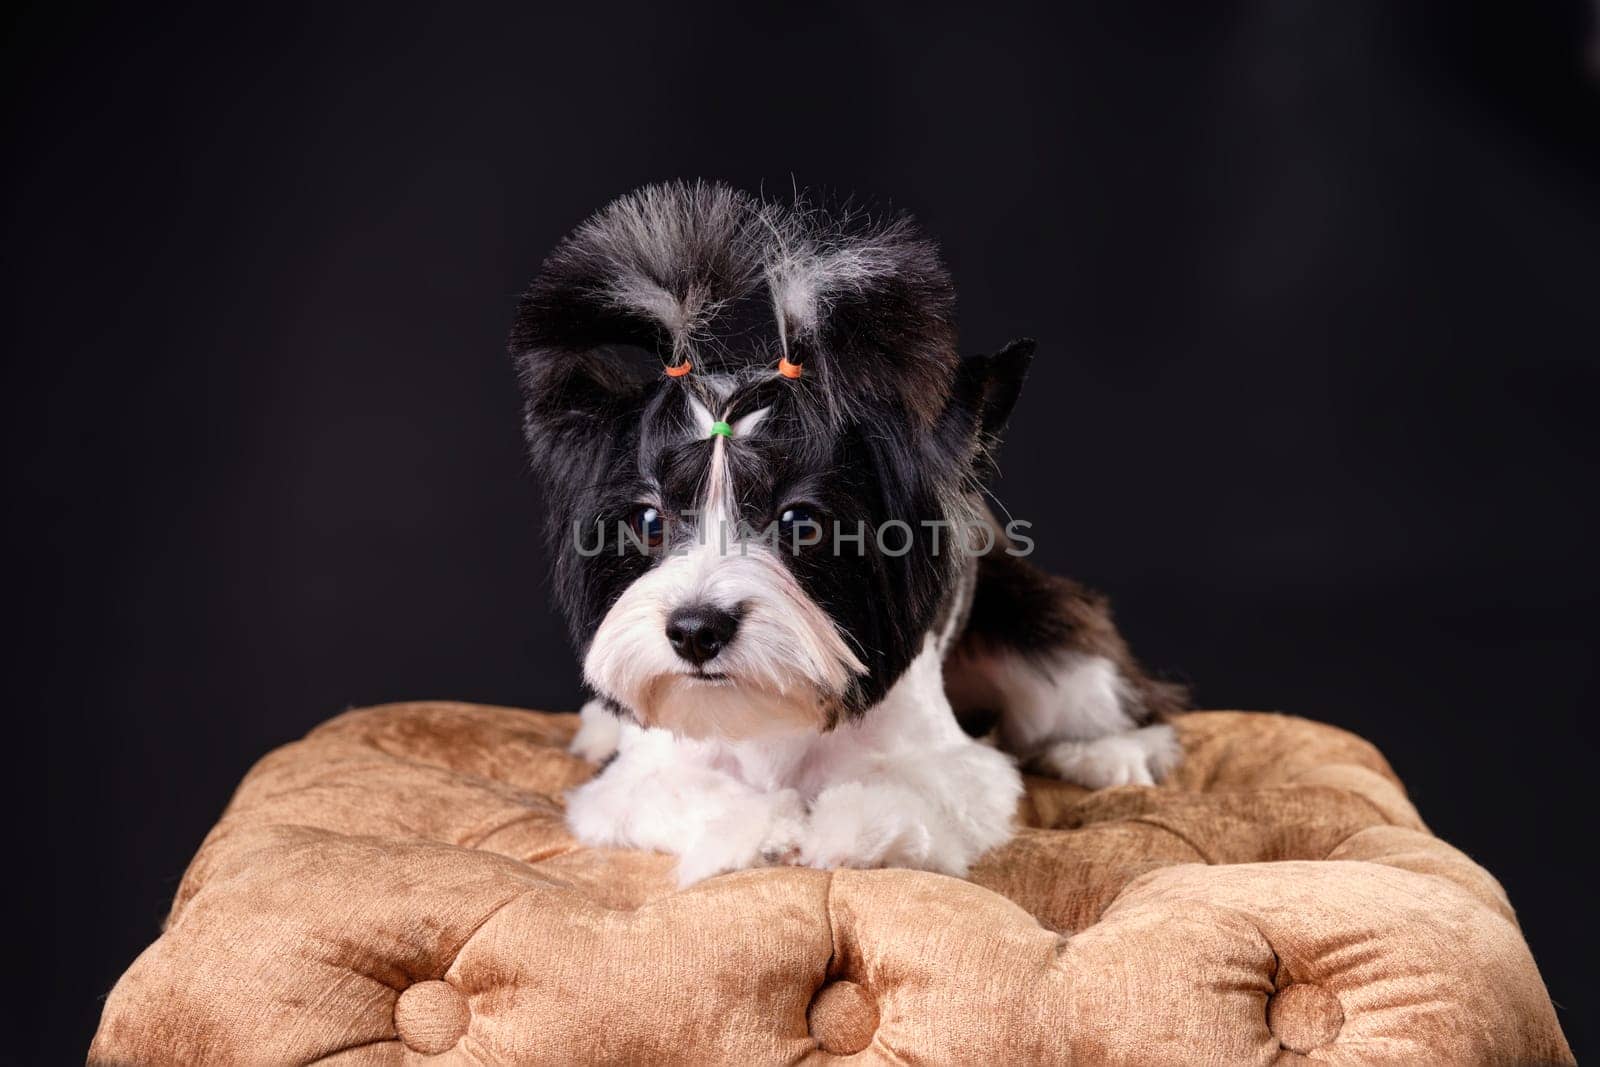 Flawless Yorkshire terrier Beaver on a golden pouf close-up, studio photo.